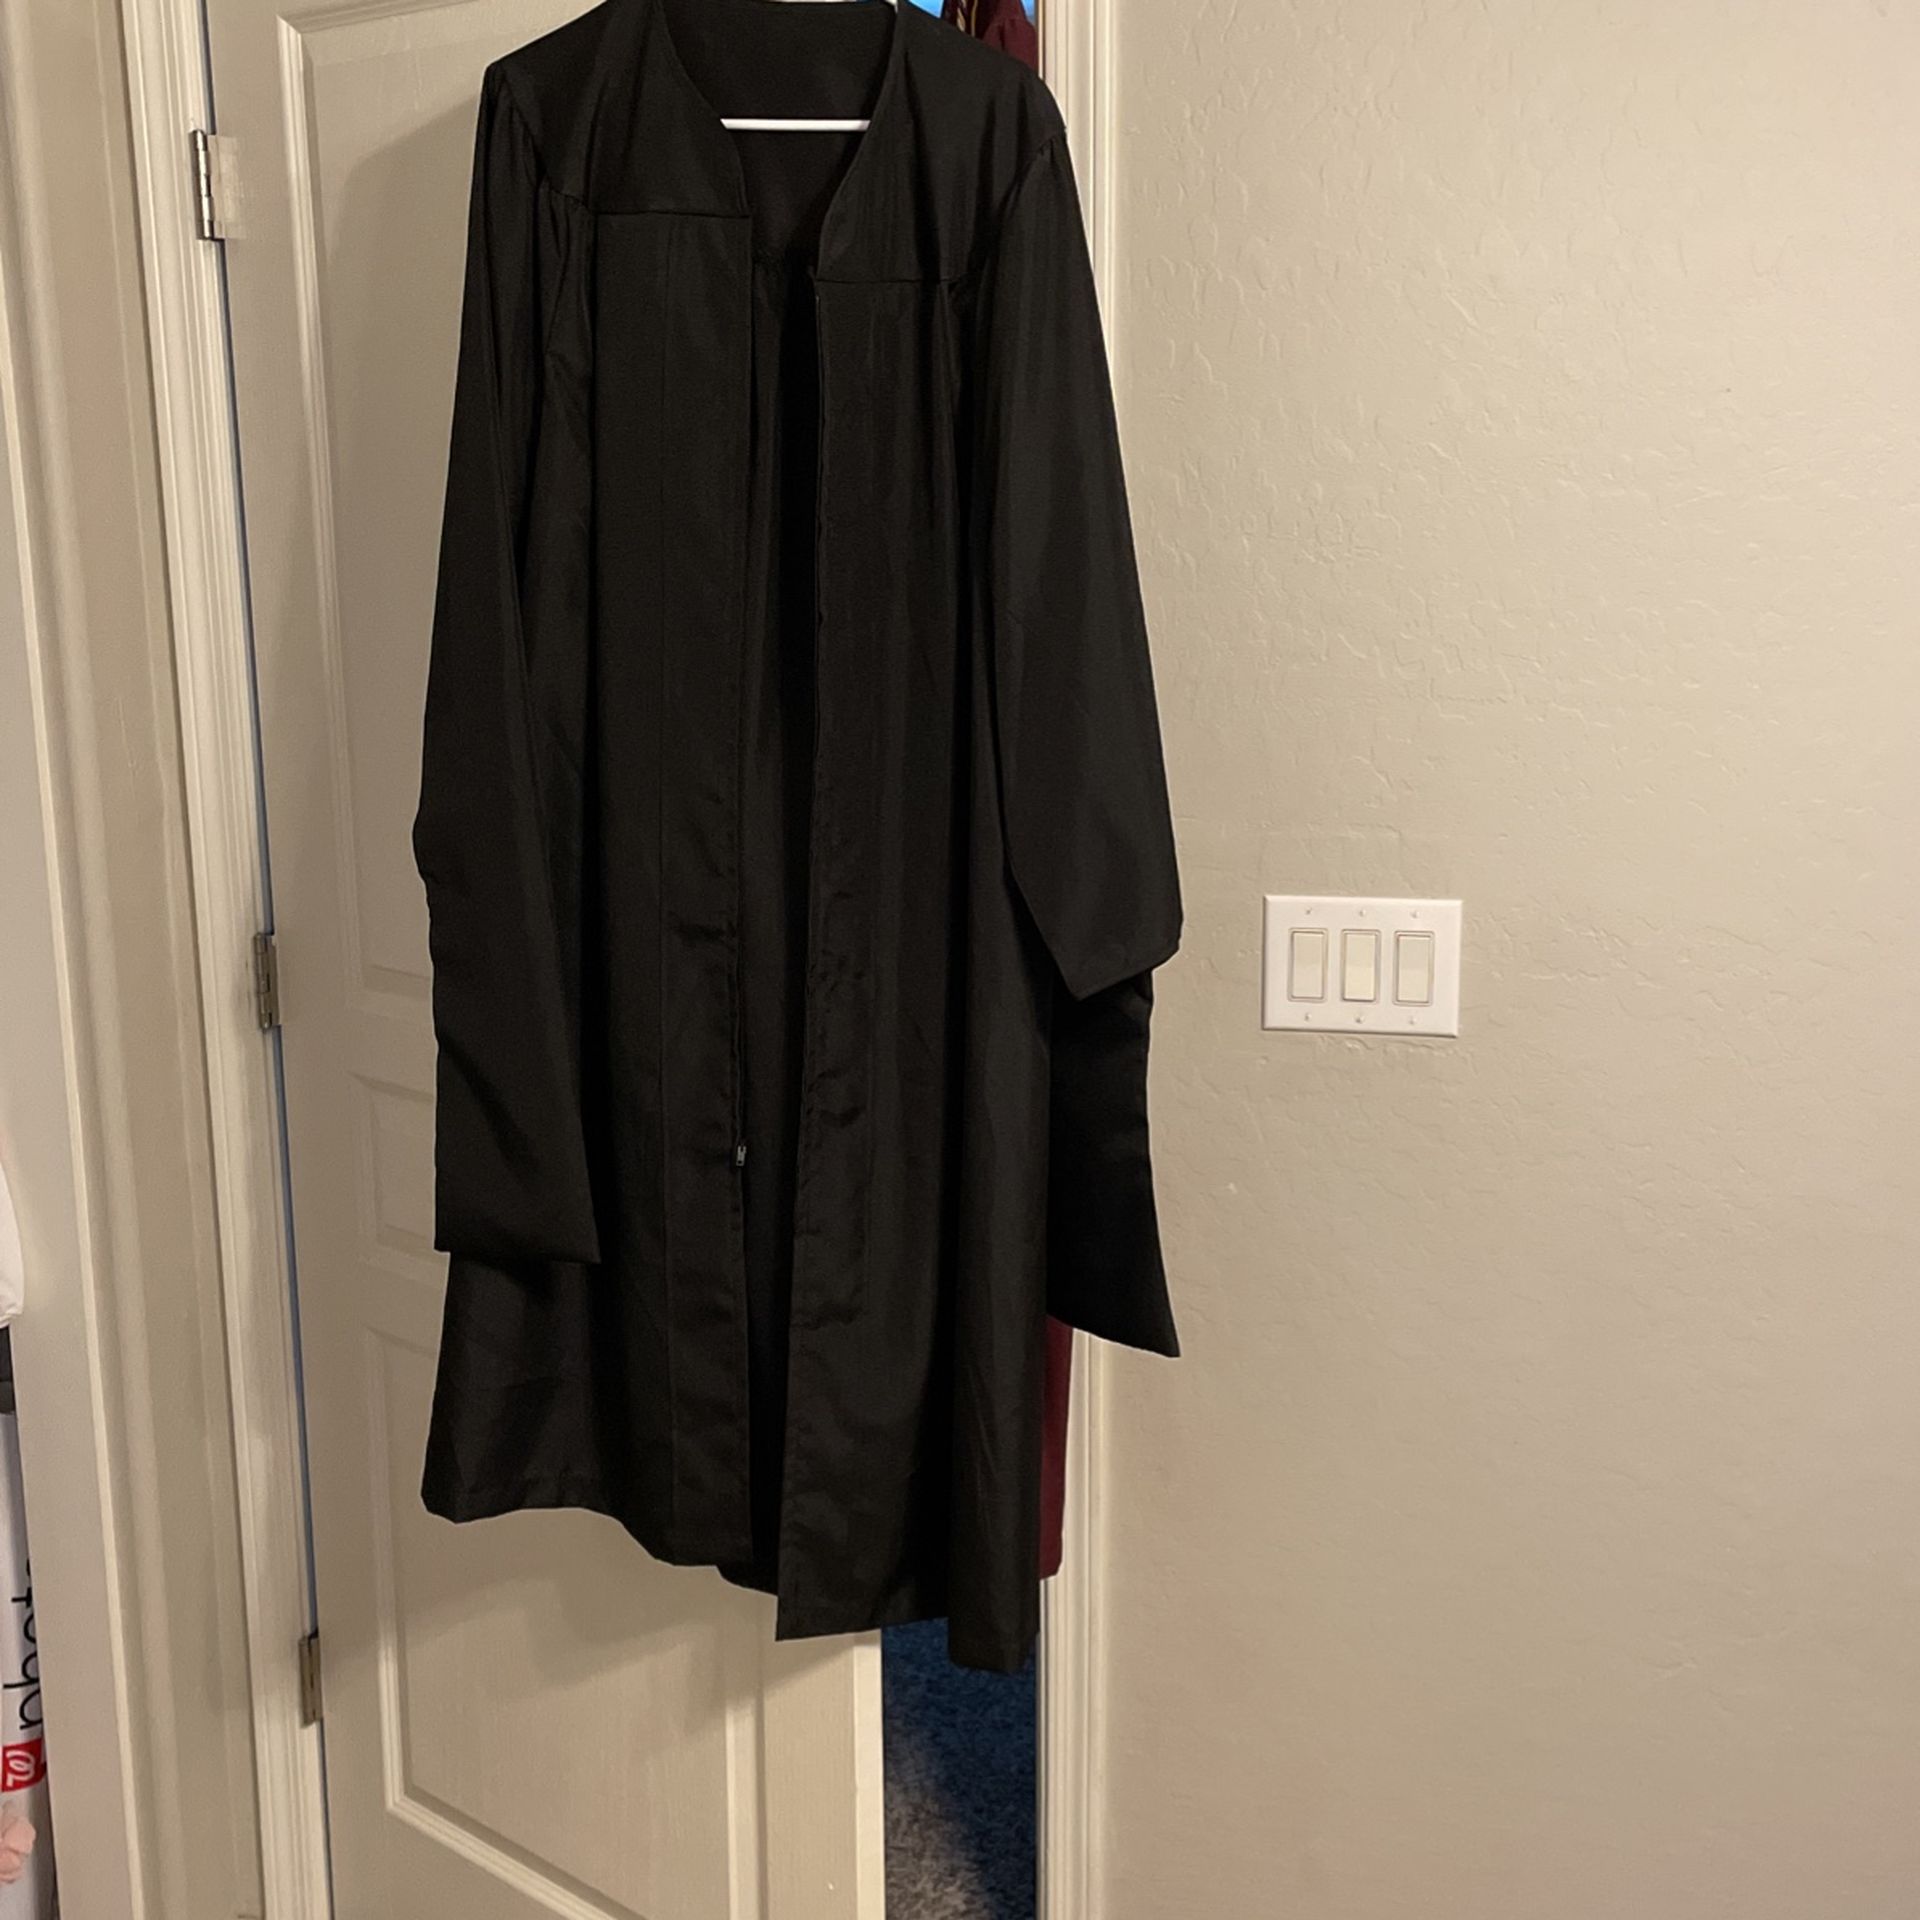 GCU (Masters) Cap And Gown 5’5 